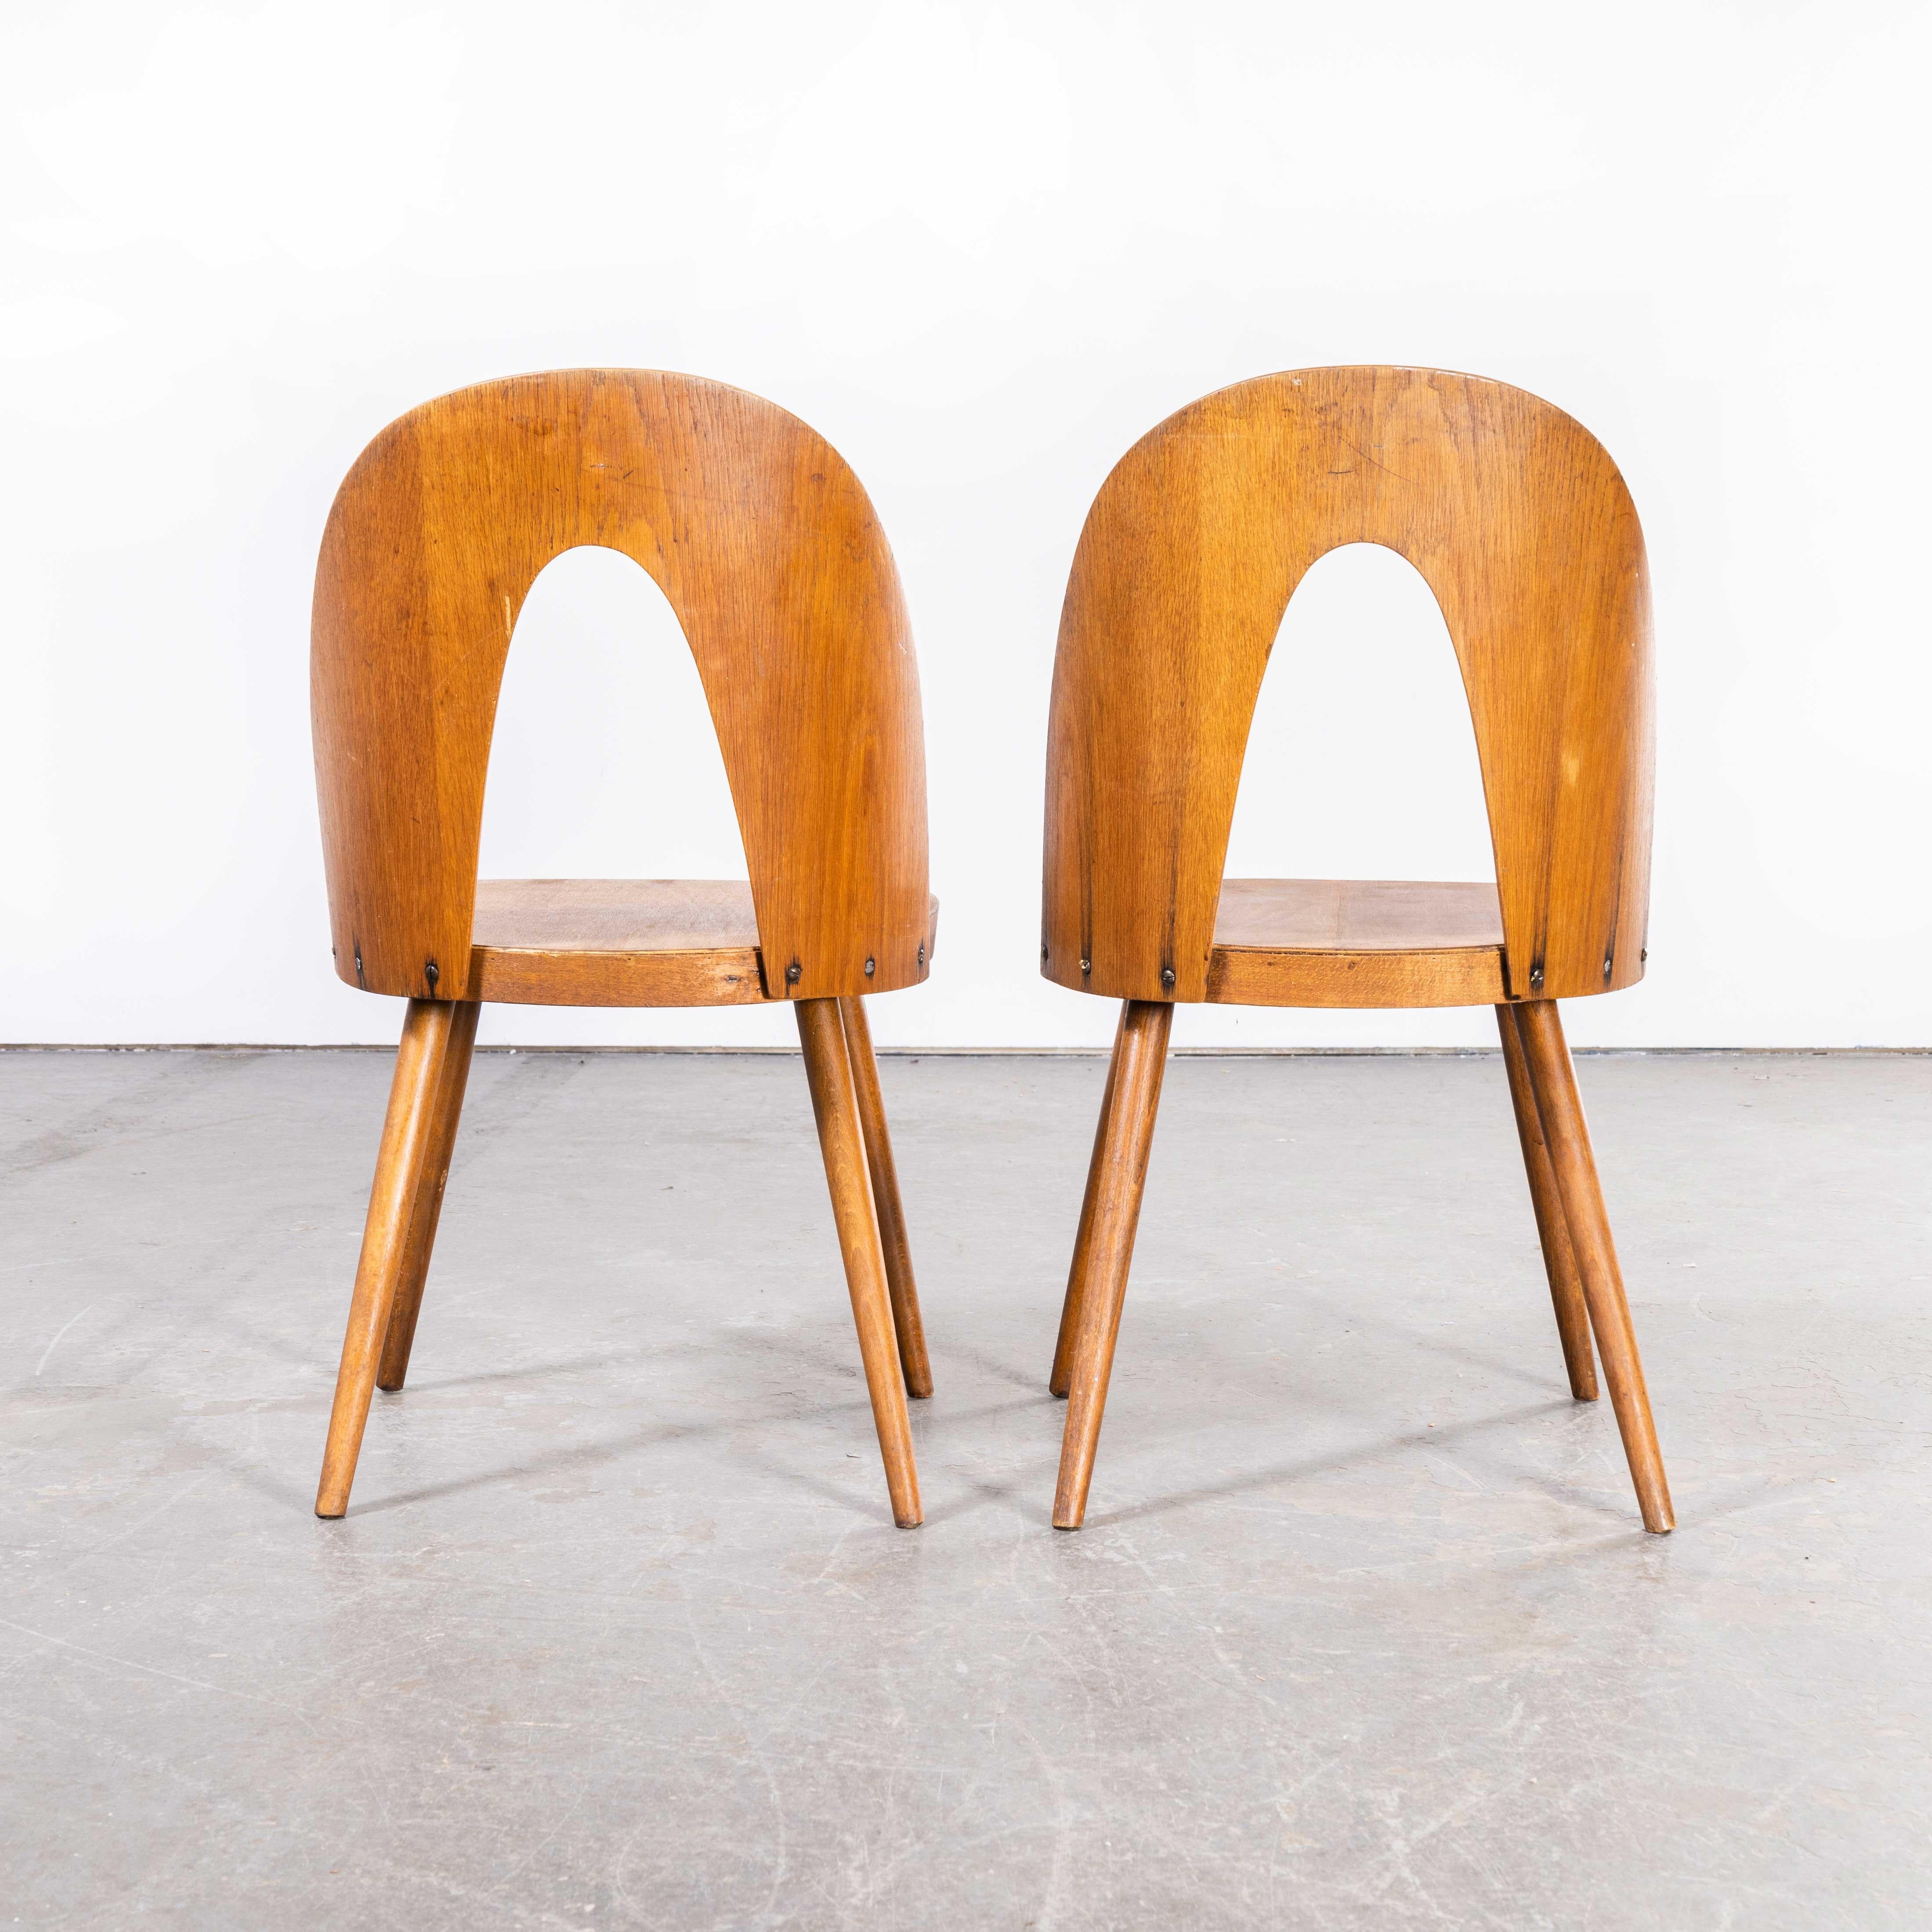 Czech 1960's Dining Chairs by Antonin Suman for Ton, Pair